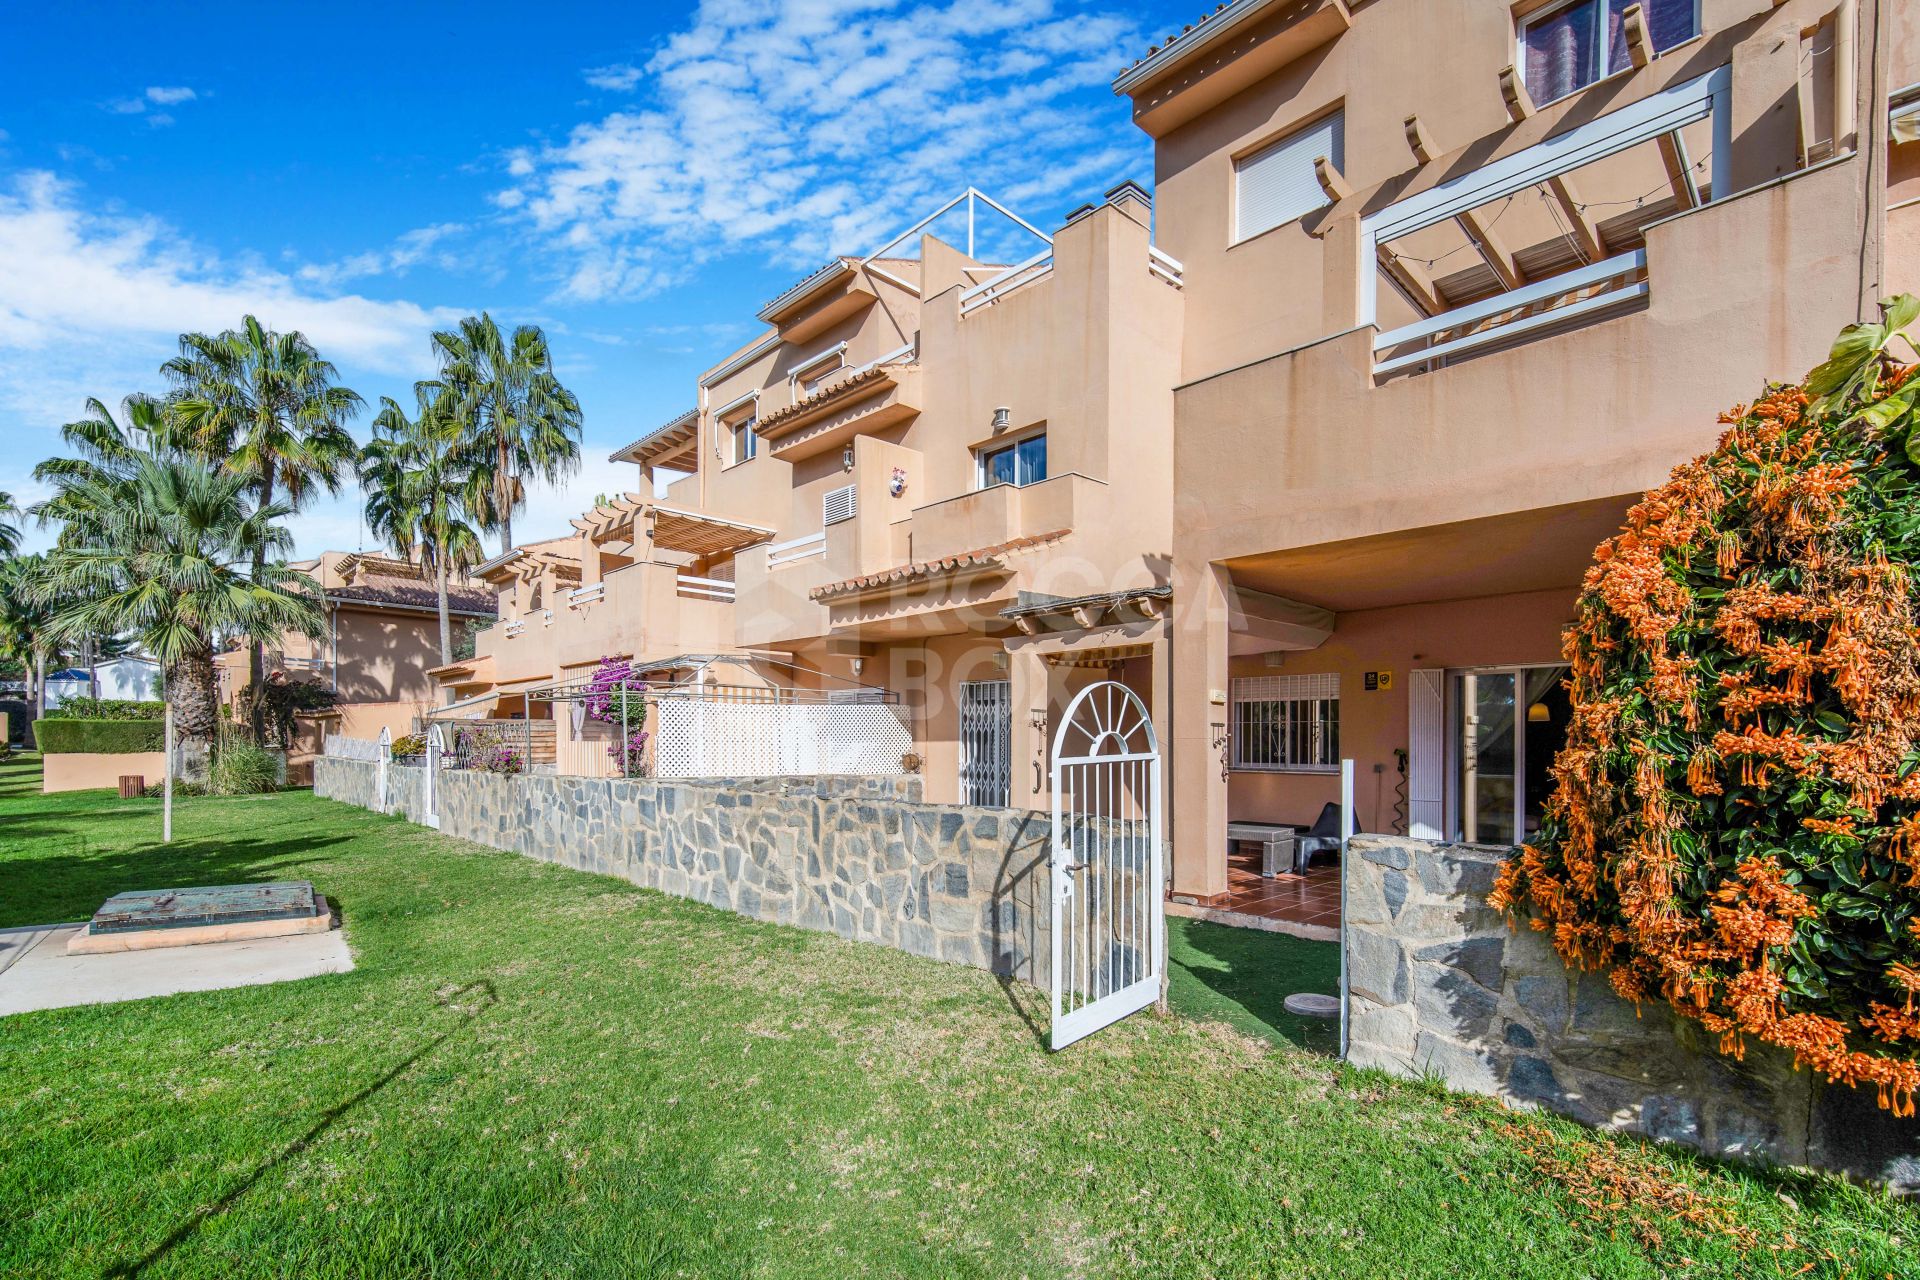 Well located three bedroom, south facing, ground floor apartment in the gated beachside community Carib Playa, Marbella